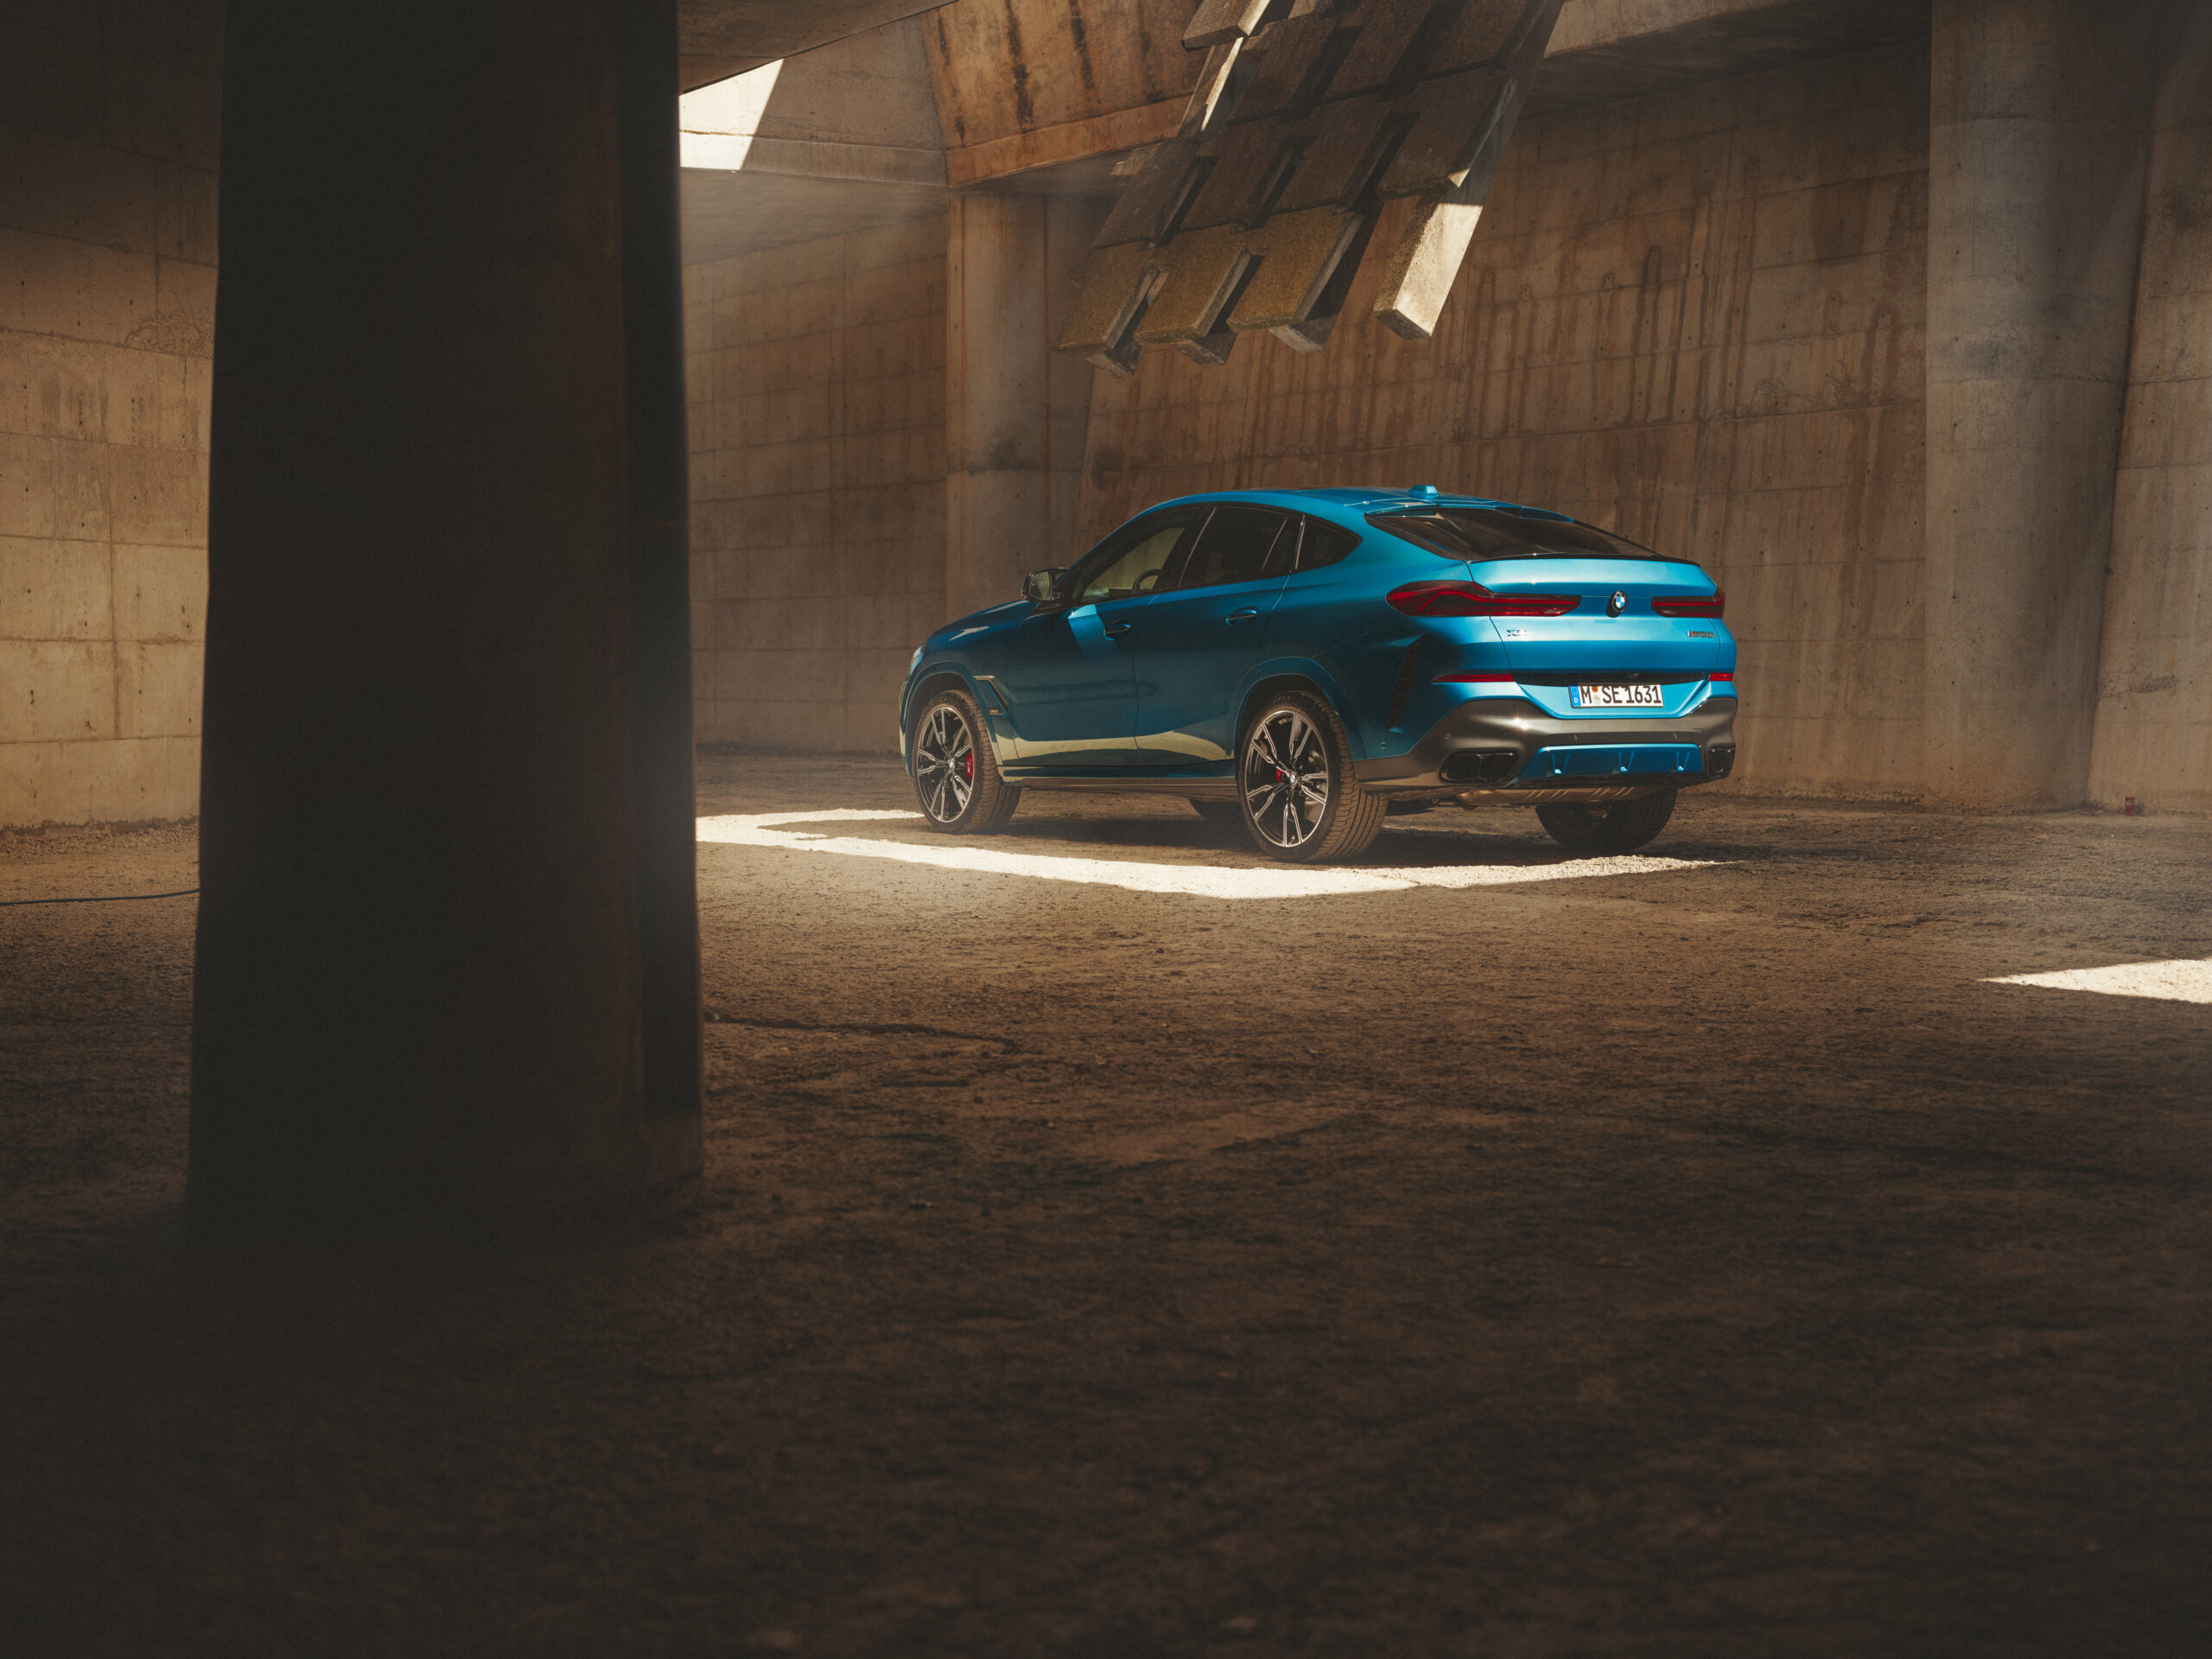 P90492402 highRes the new bmw x6 m60i scaled